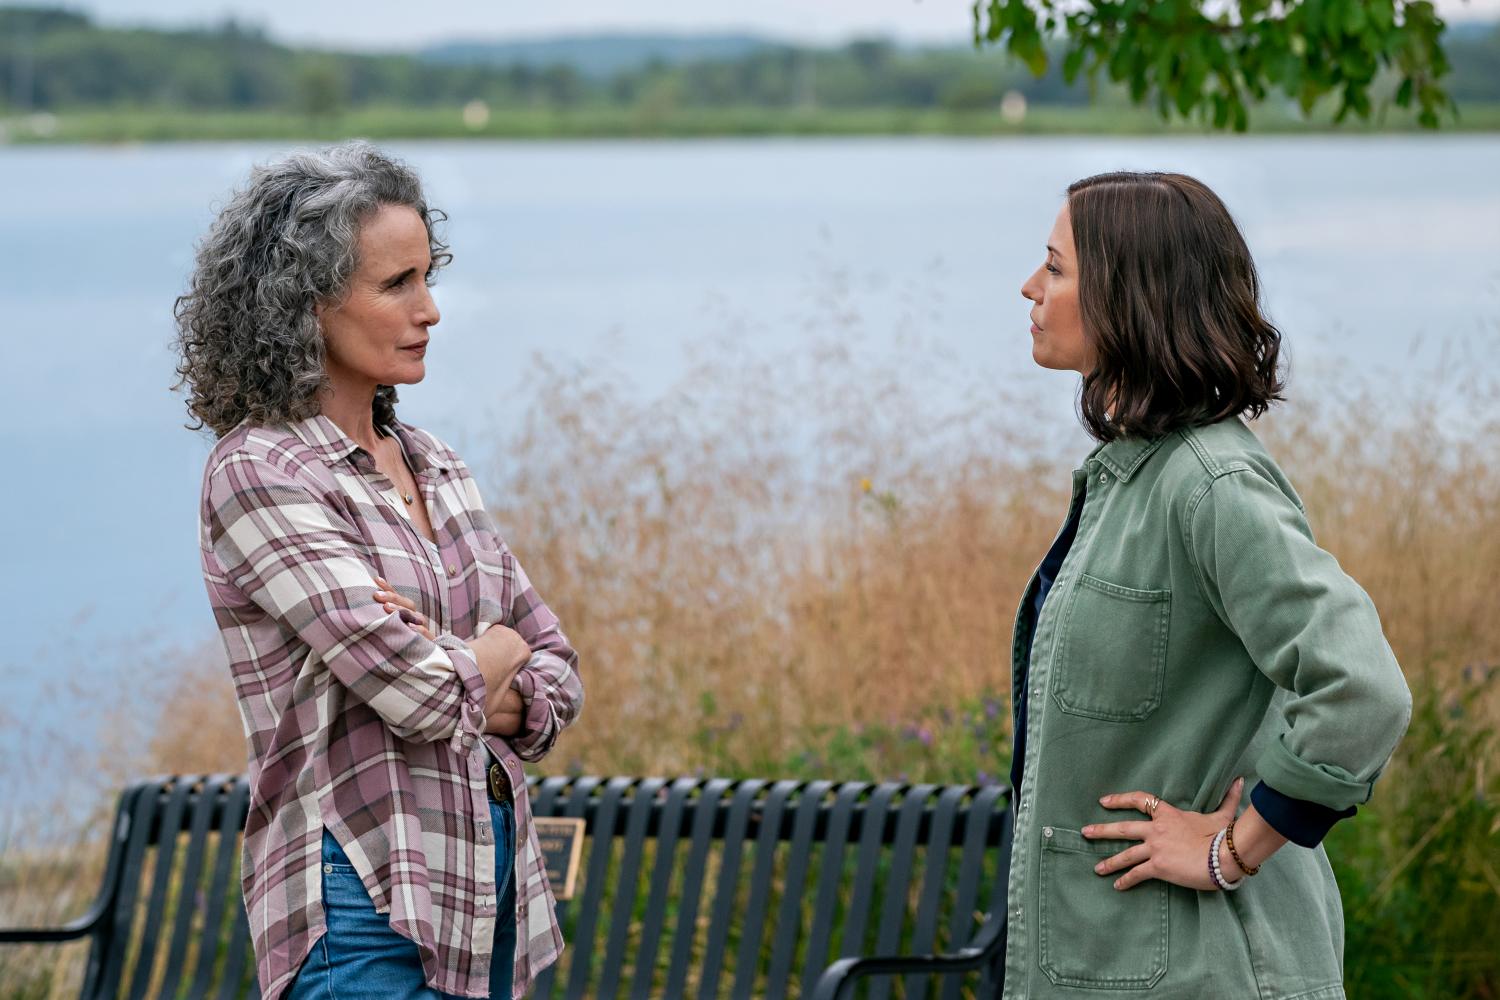 Hallmark's The Way Home stars Andie MacDowell and Chyler Leigh